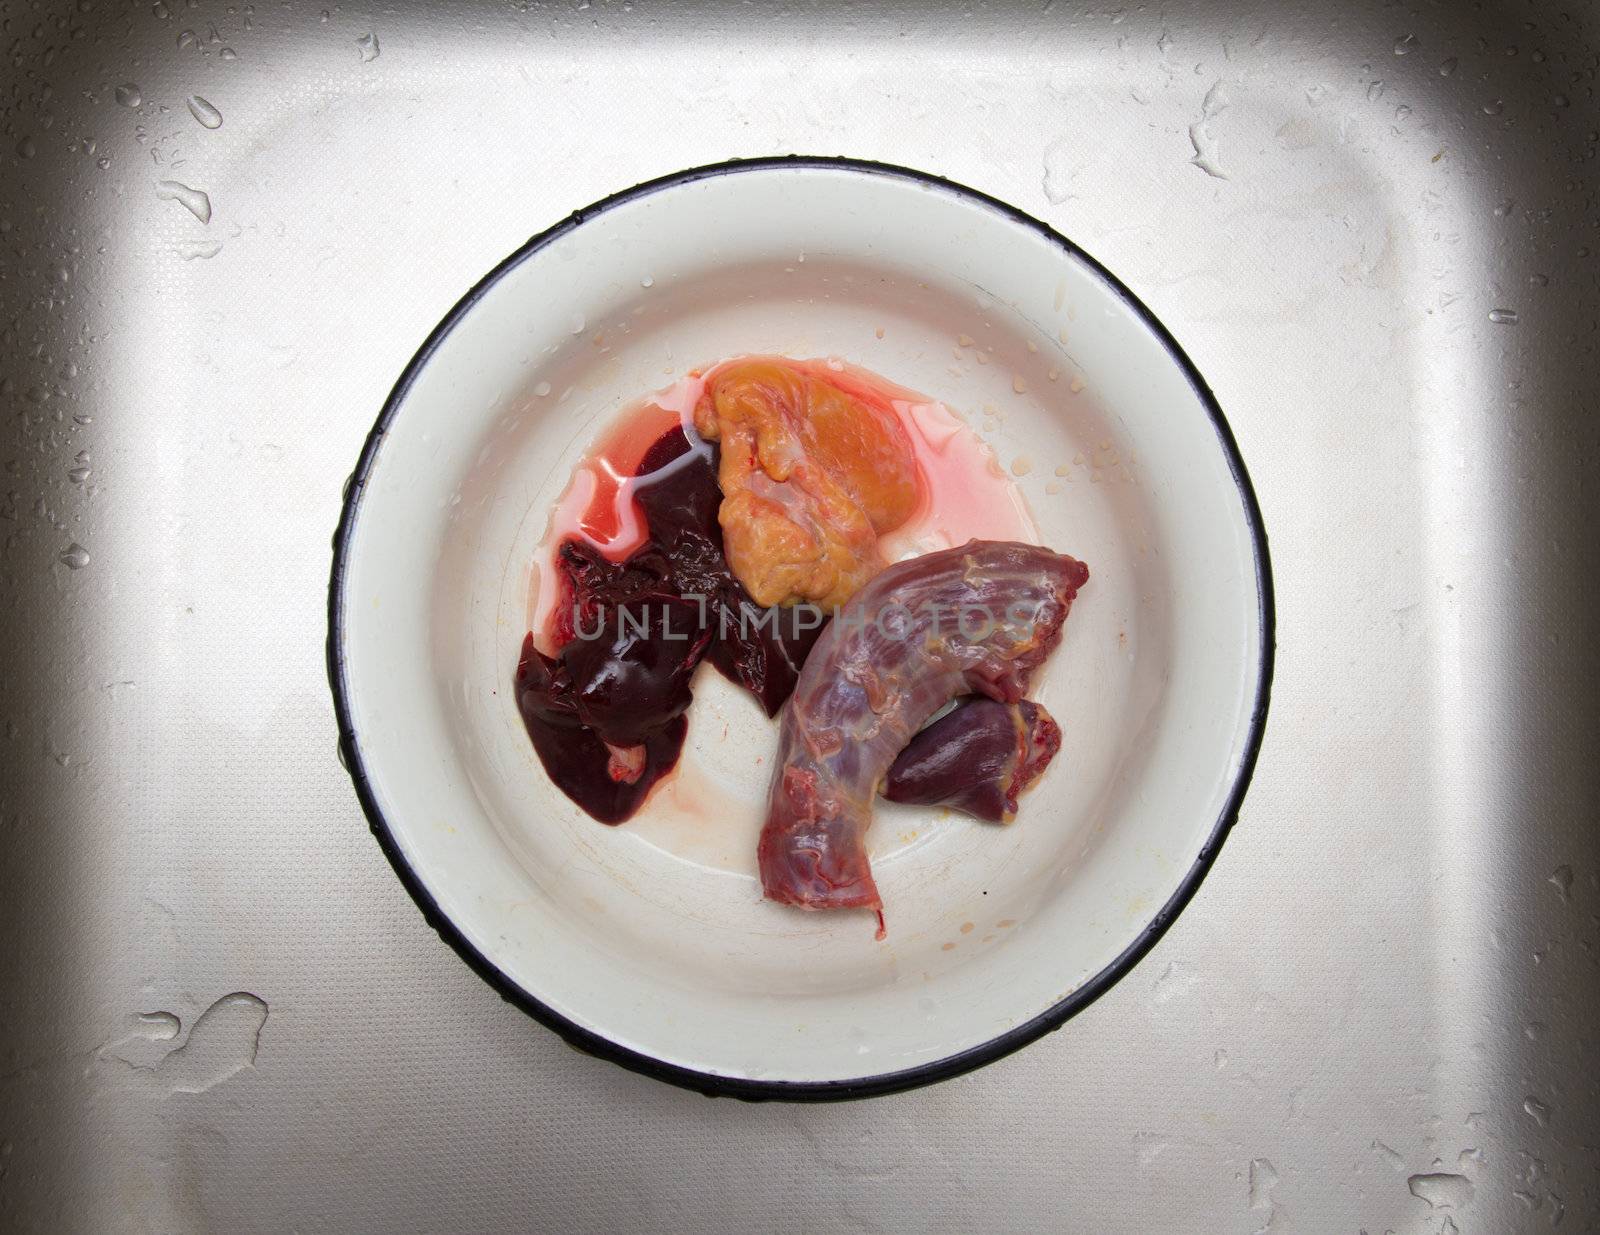 meat in a dish on a metal background with water drops by schankz